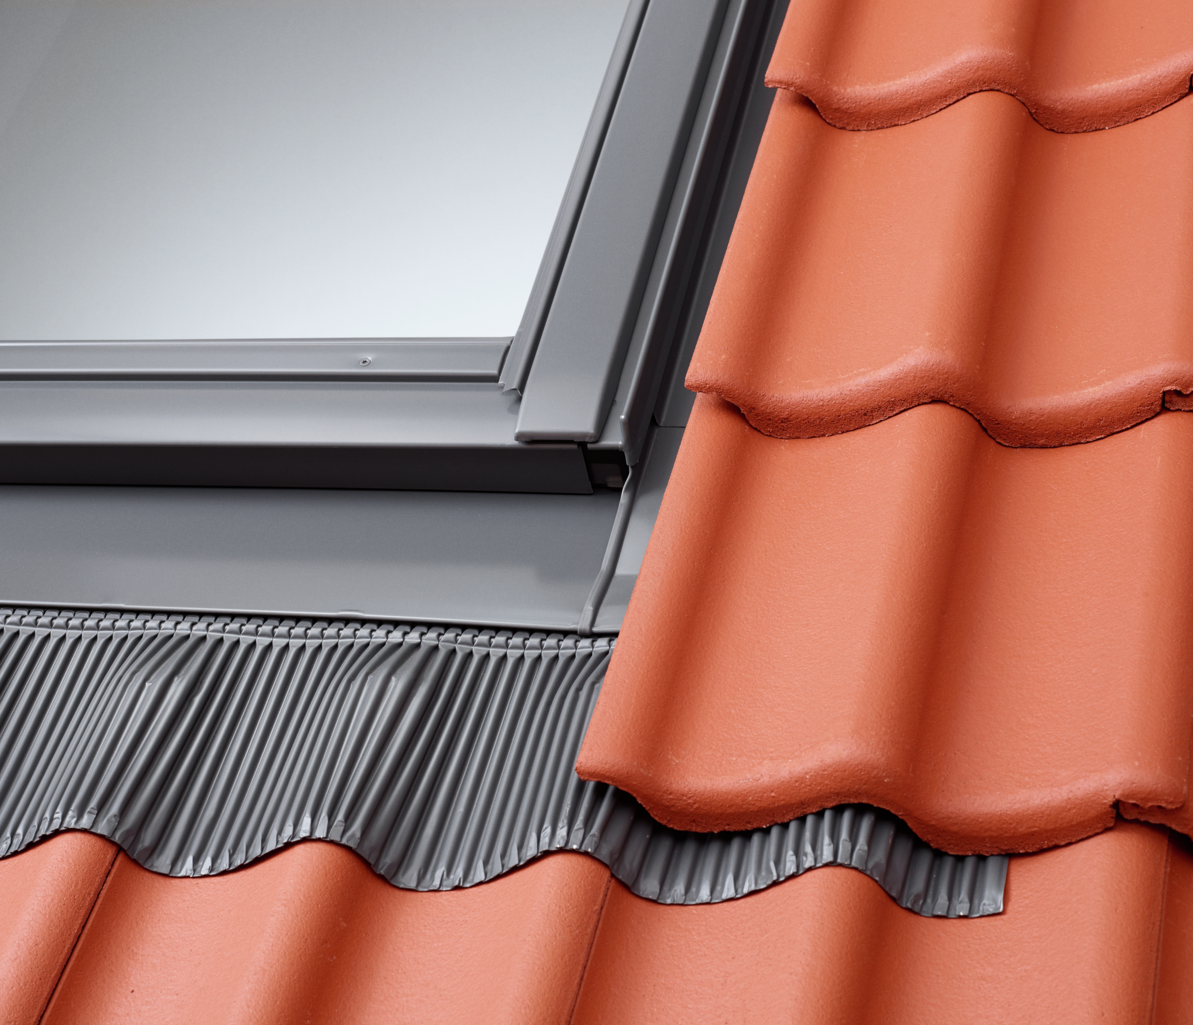 VELUX EDW SK06 S0121 for Sloping and Fixed Combinations - Tiles up to 120mm in profile